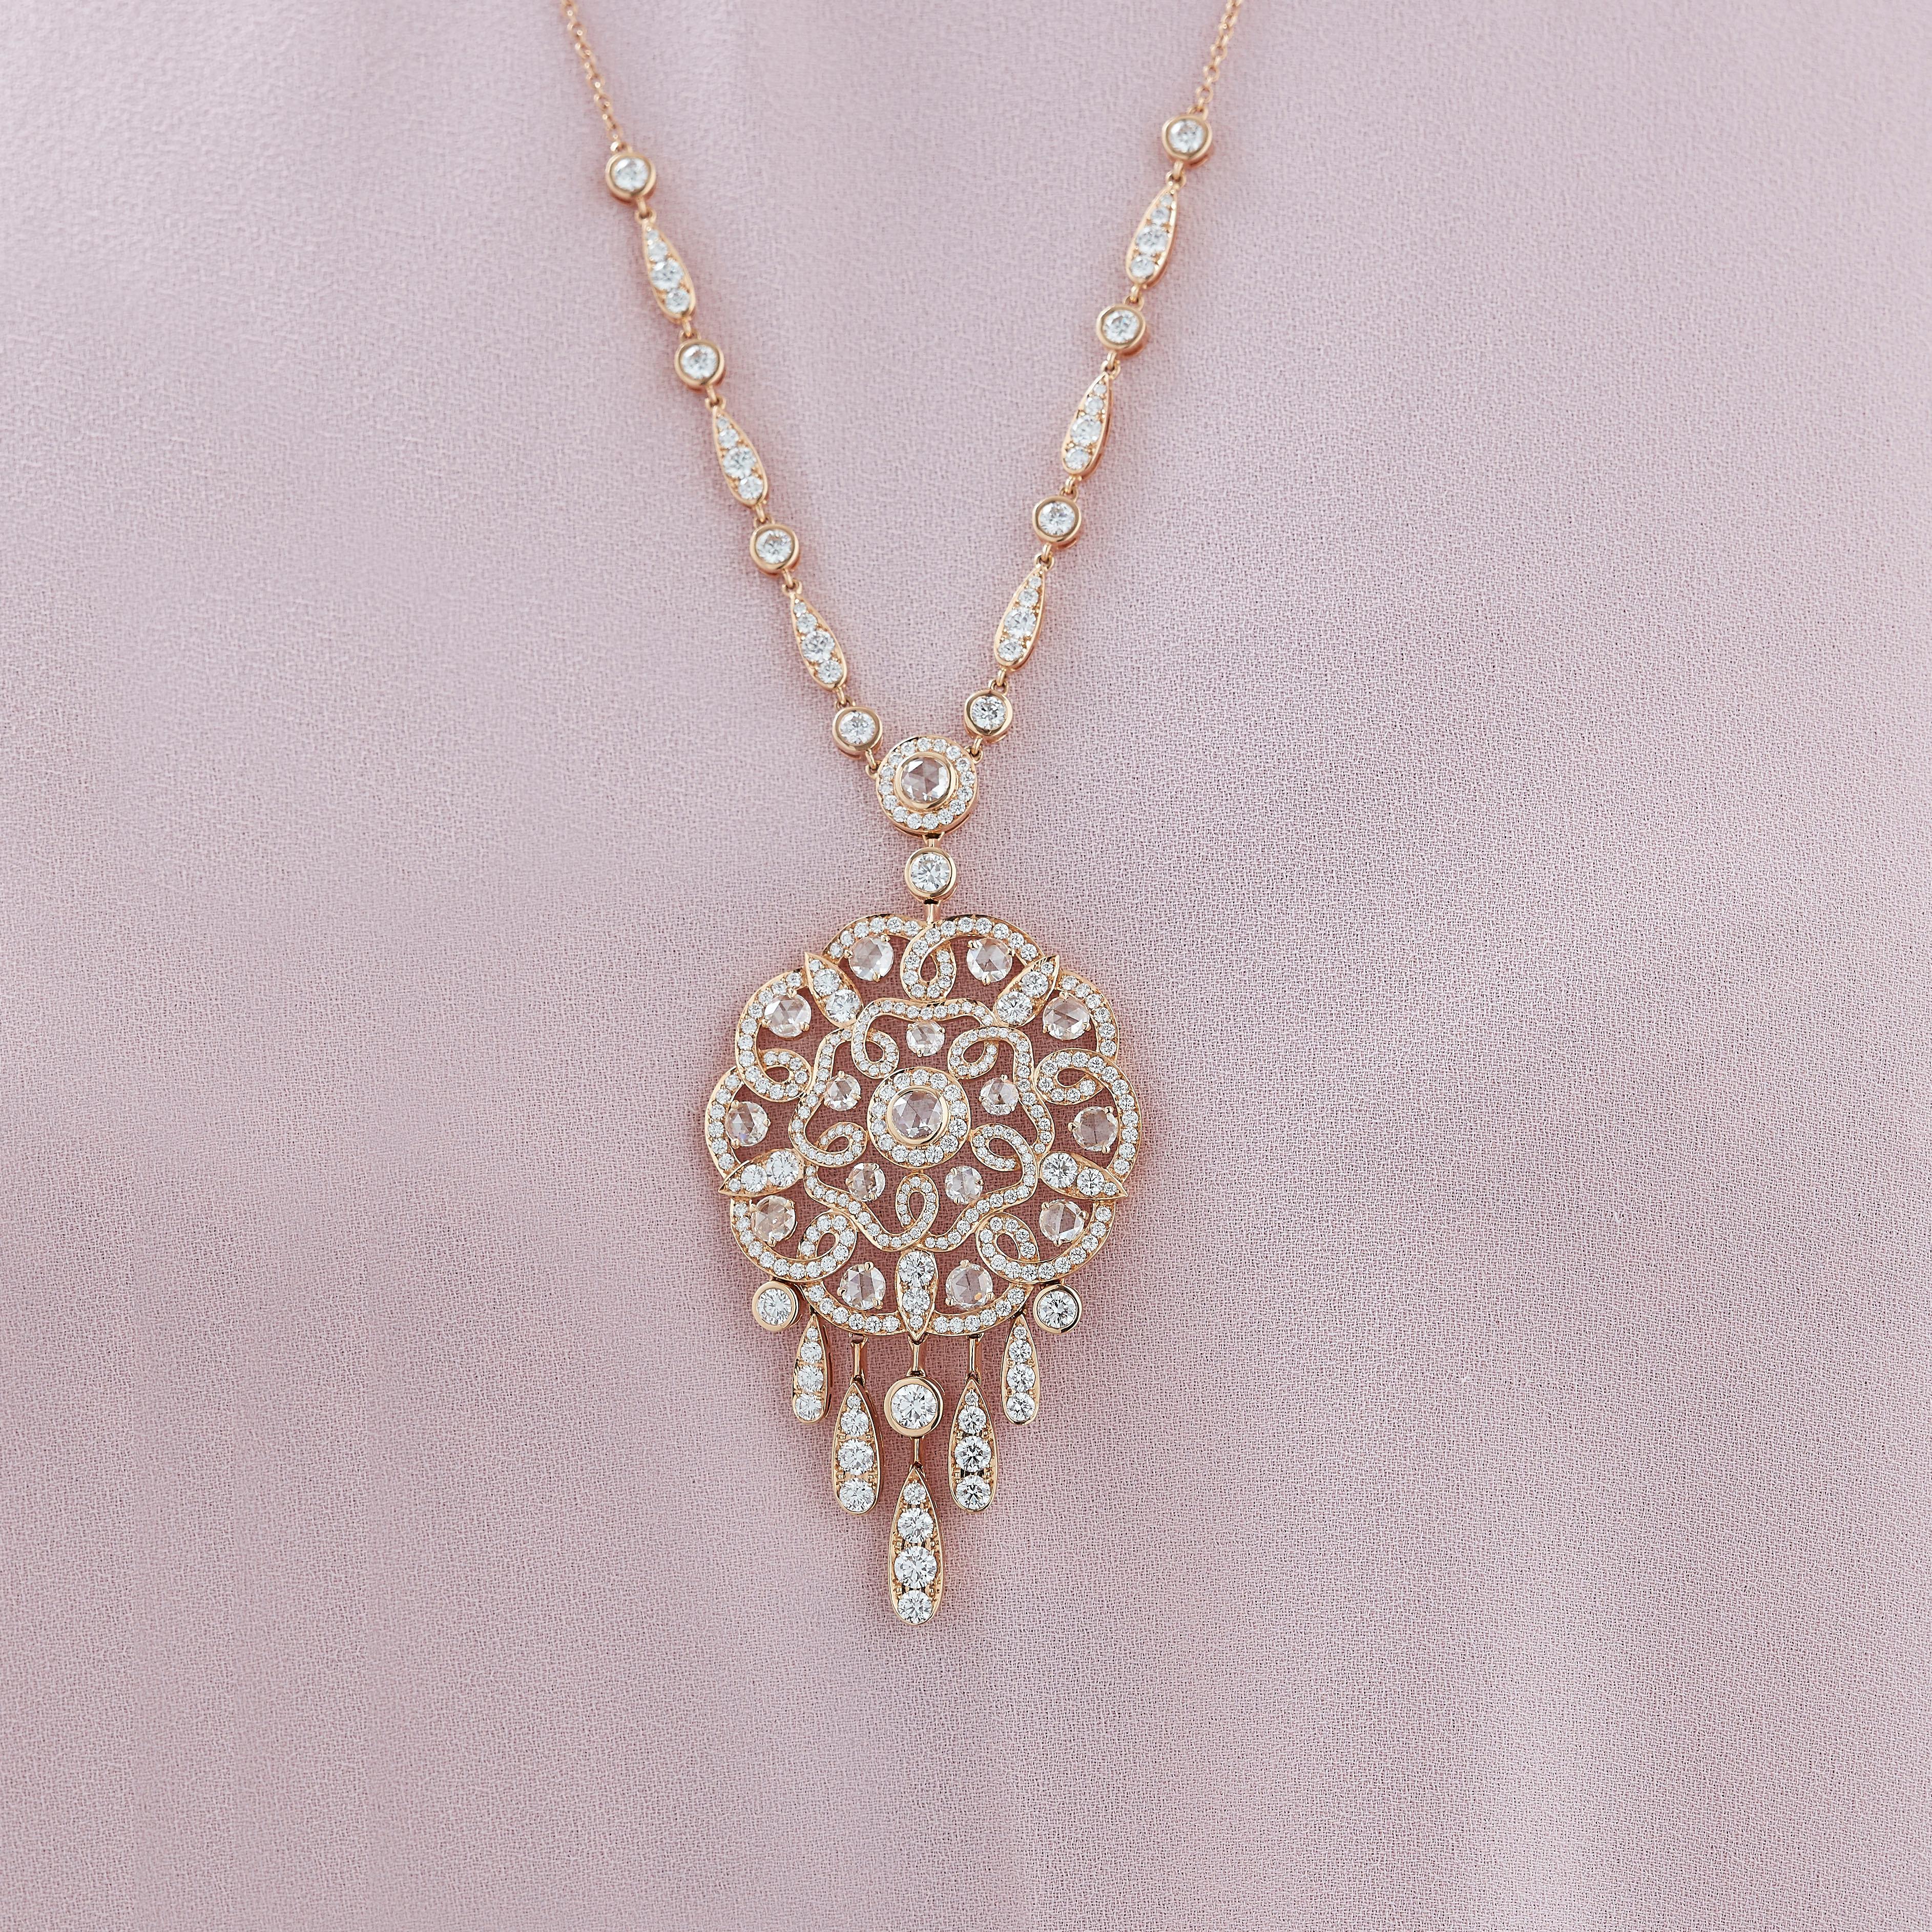 Garrard 'Tudor Rose' 18 Karat Rose Gold and Rose Cut Diamond Necklace In New Condition For Sale In London, London